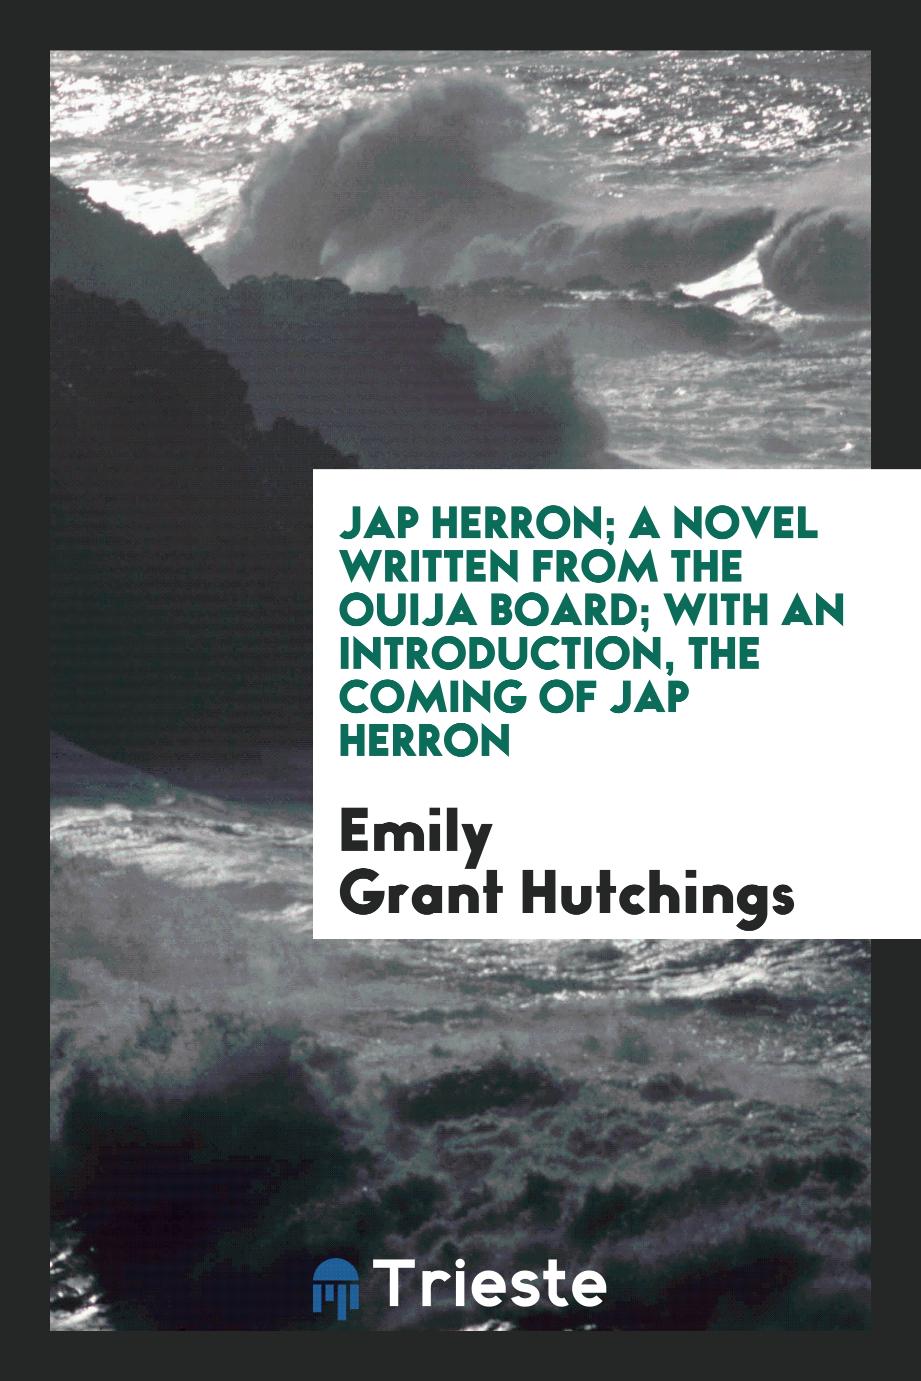 Jap Herron; a novel written from the ouija board; with an introduction, The coming of Jap Herron